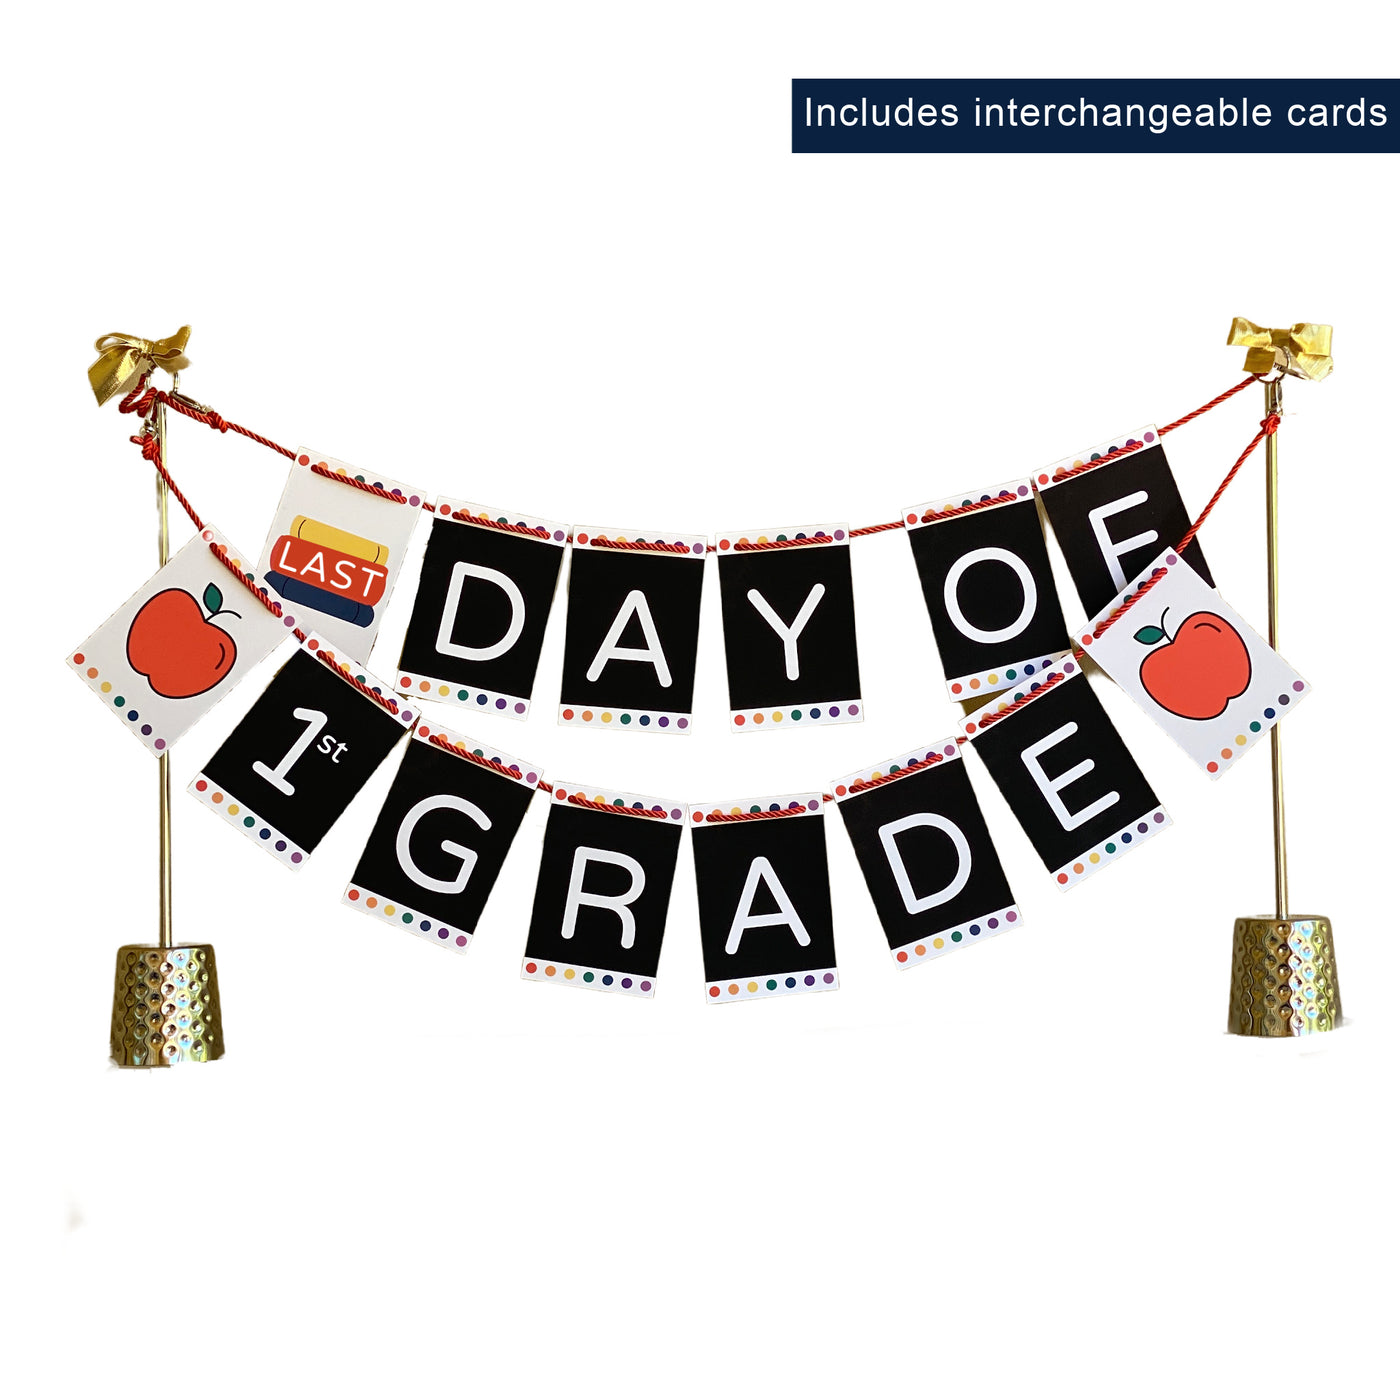 First /100th Day/Last Day of School banner kit